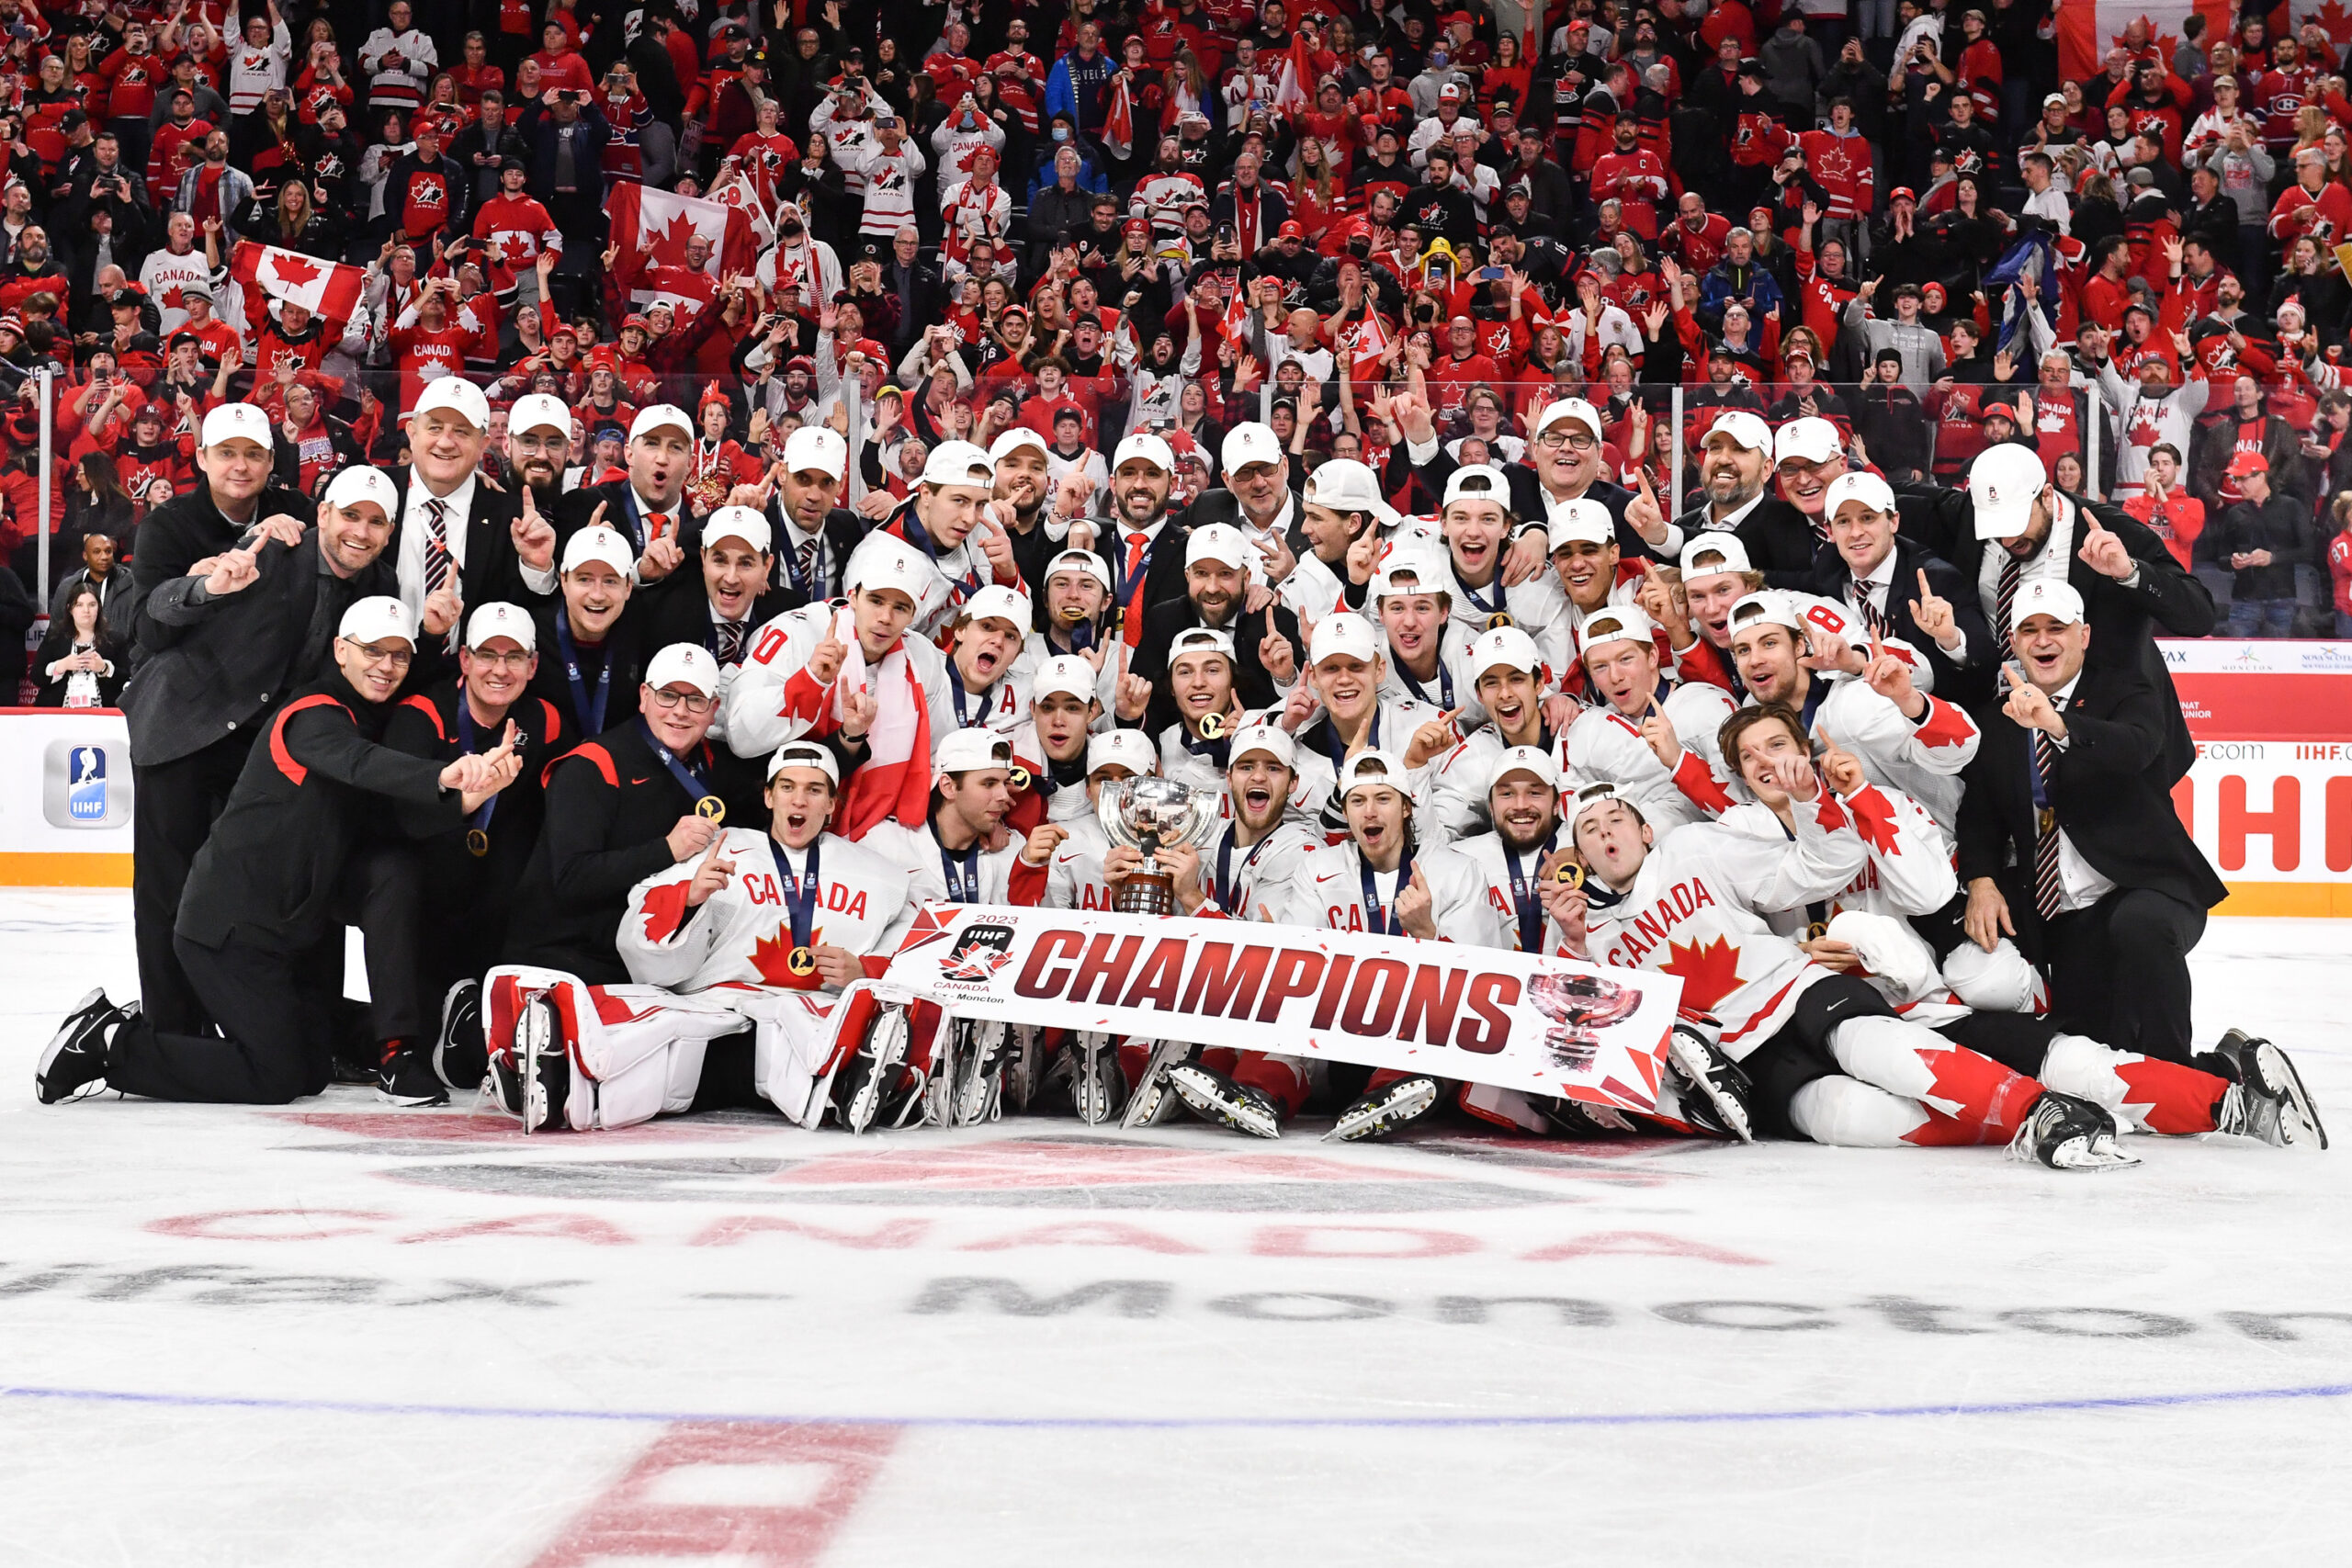 5 Takeaways From Canada's 32 Gold Medal Win Over Czechia